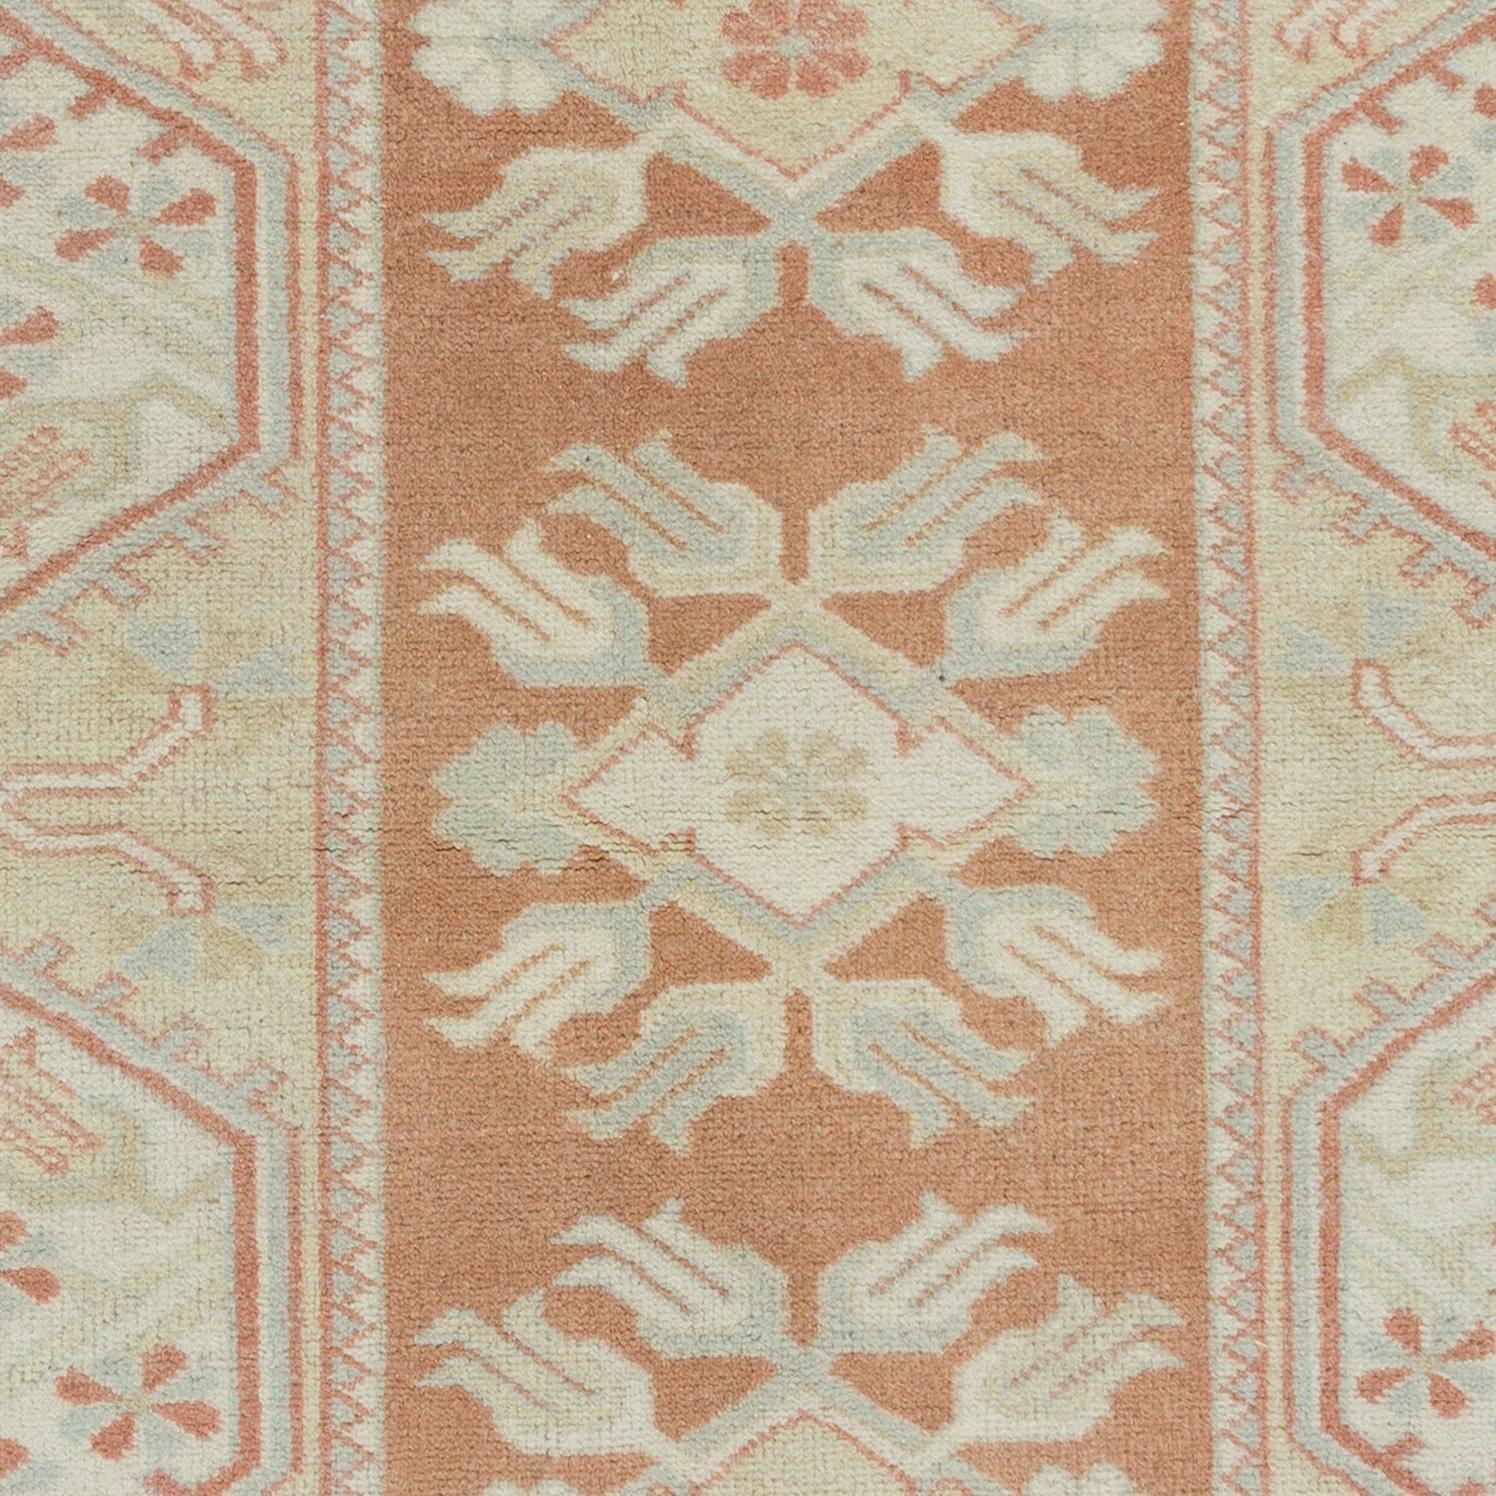 Hand-Knotted 2.7x4.3 Ft Vintage Handmade Anatolian Milas Small Rug in Beige & Soft Red Colors For Sale